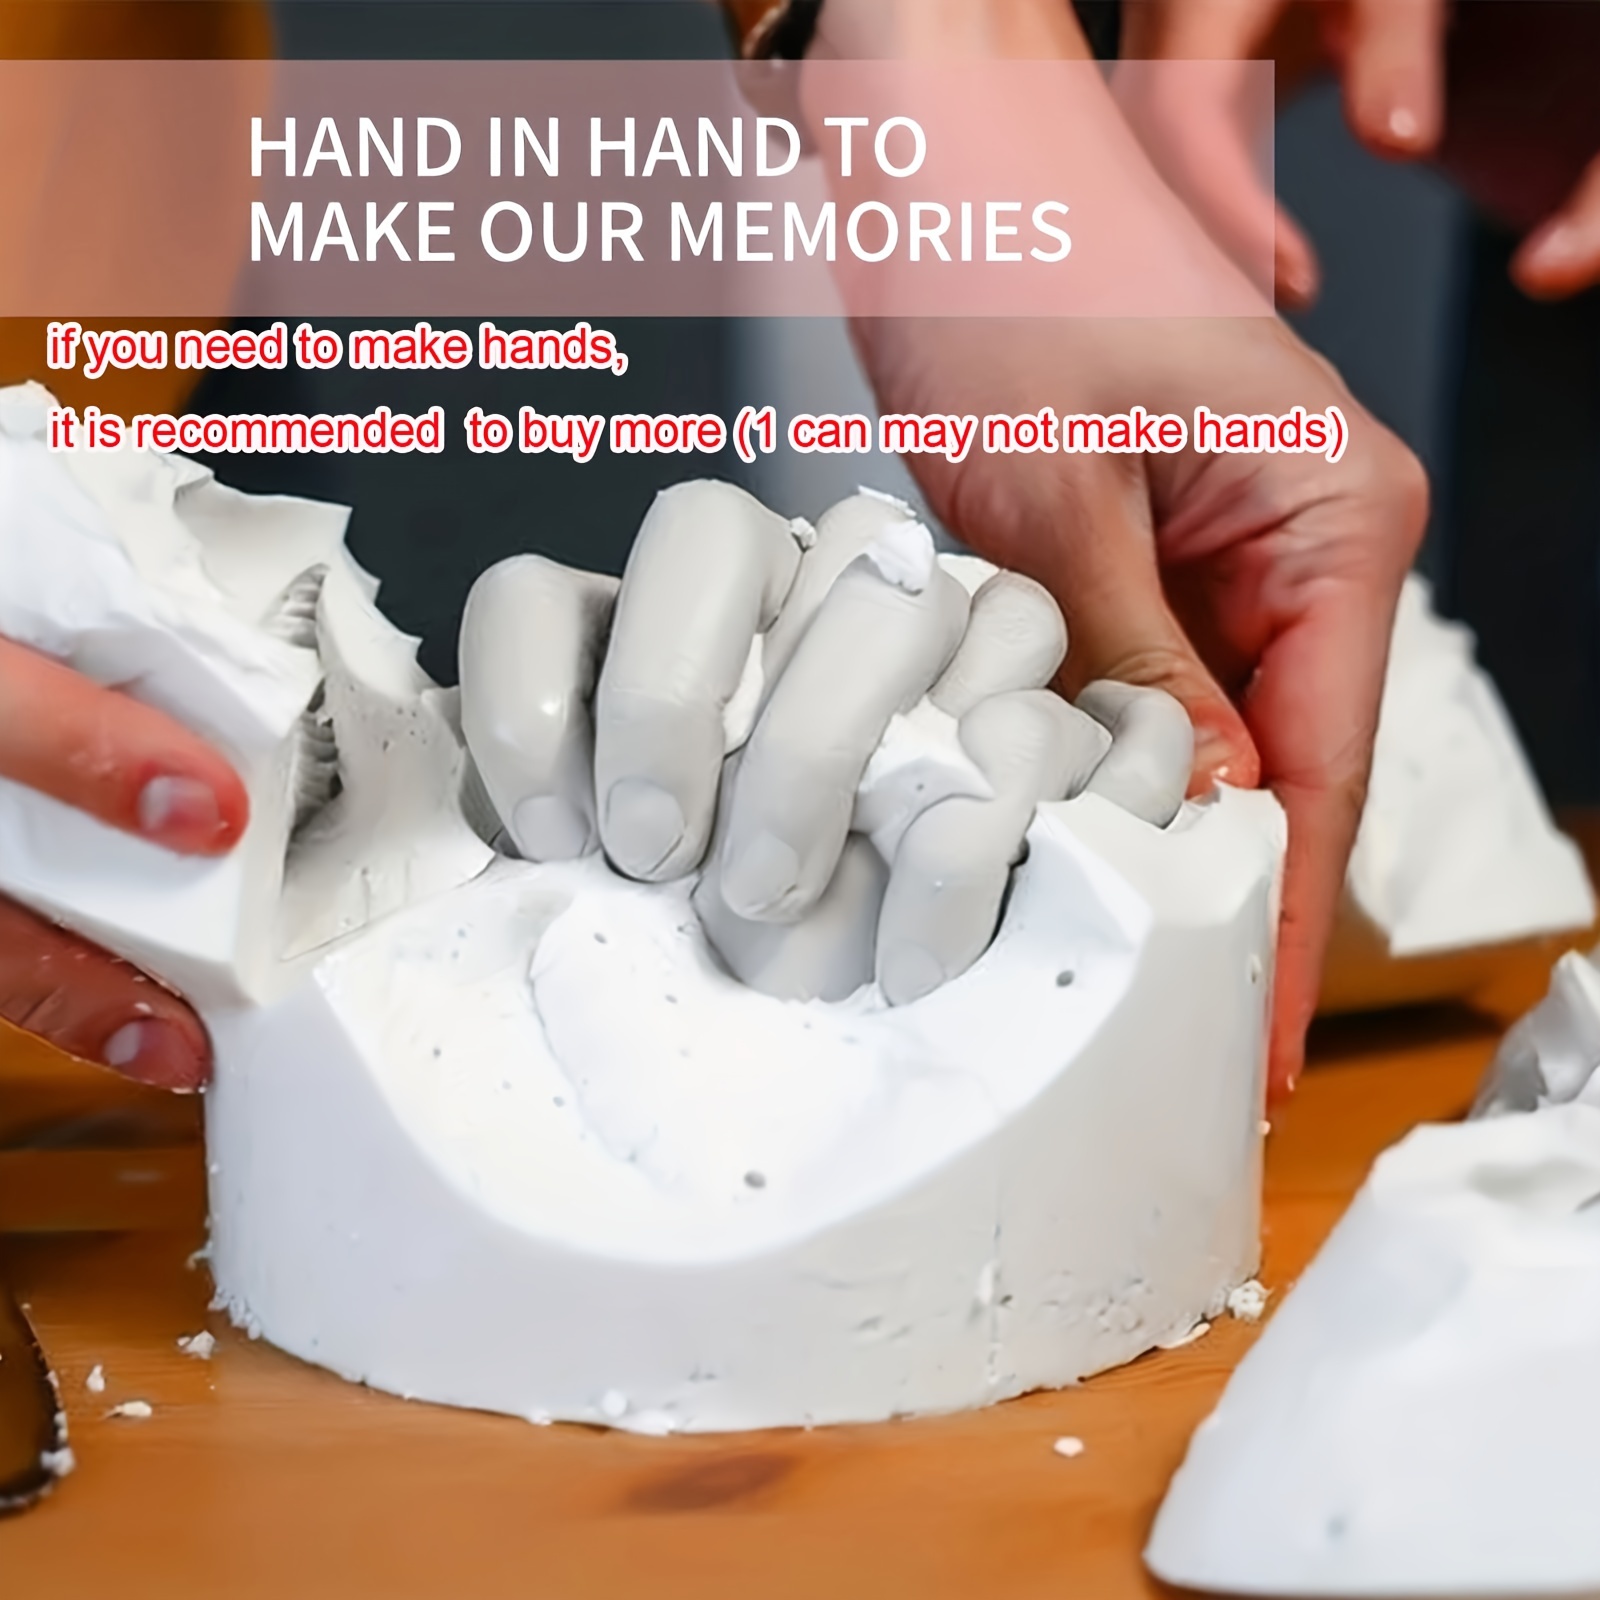 Hand Casting Kit Family Size & Hand Mold Kit Family, Wedding, Friends,  Couples, Anniversary and Holiday Activities, Hand Molding Kit for Family by